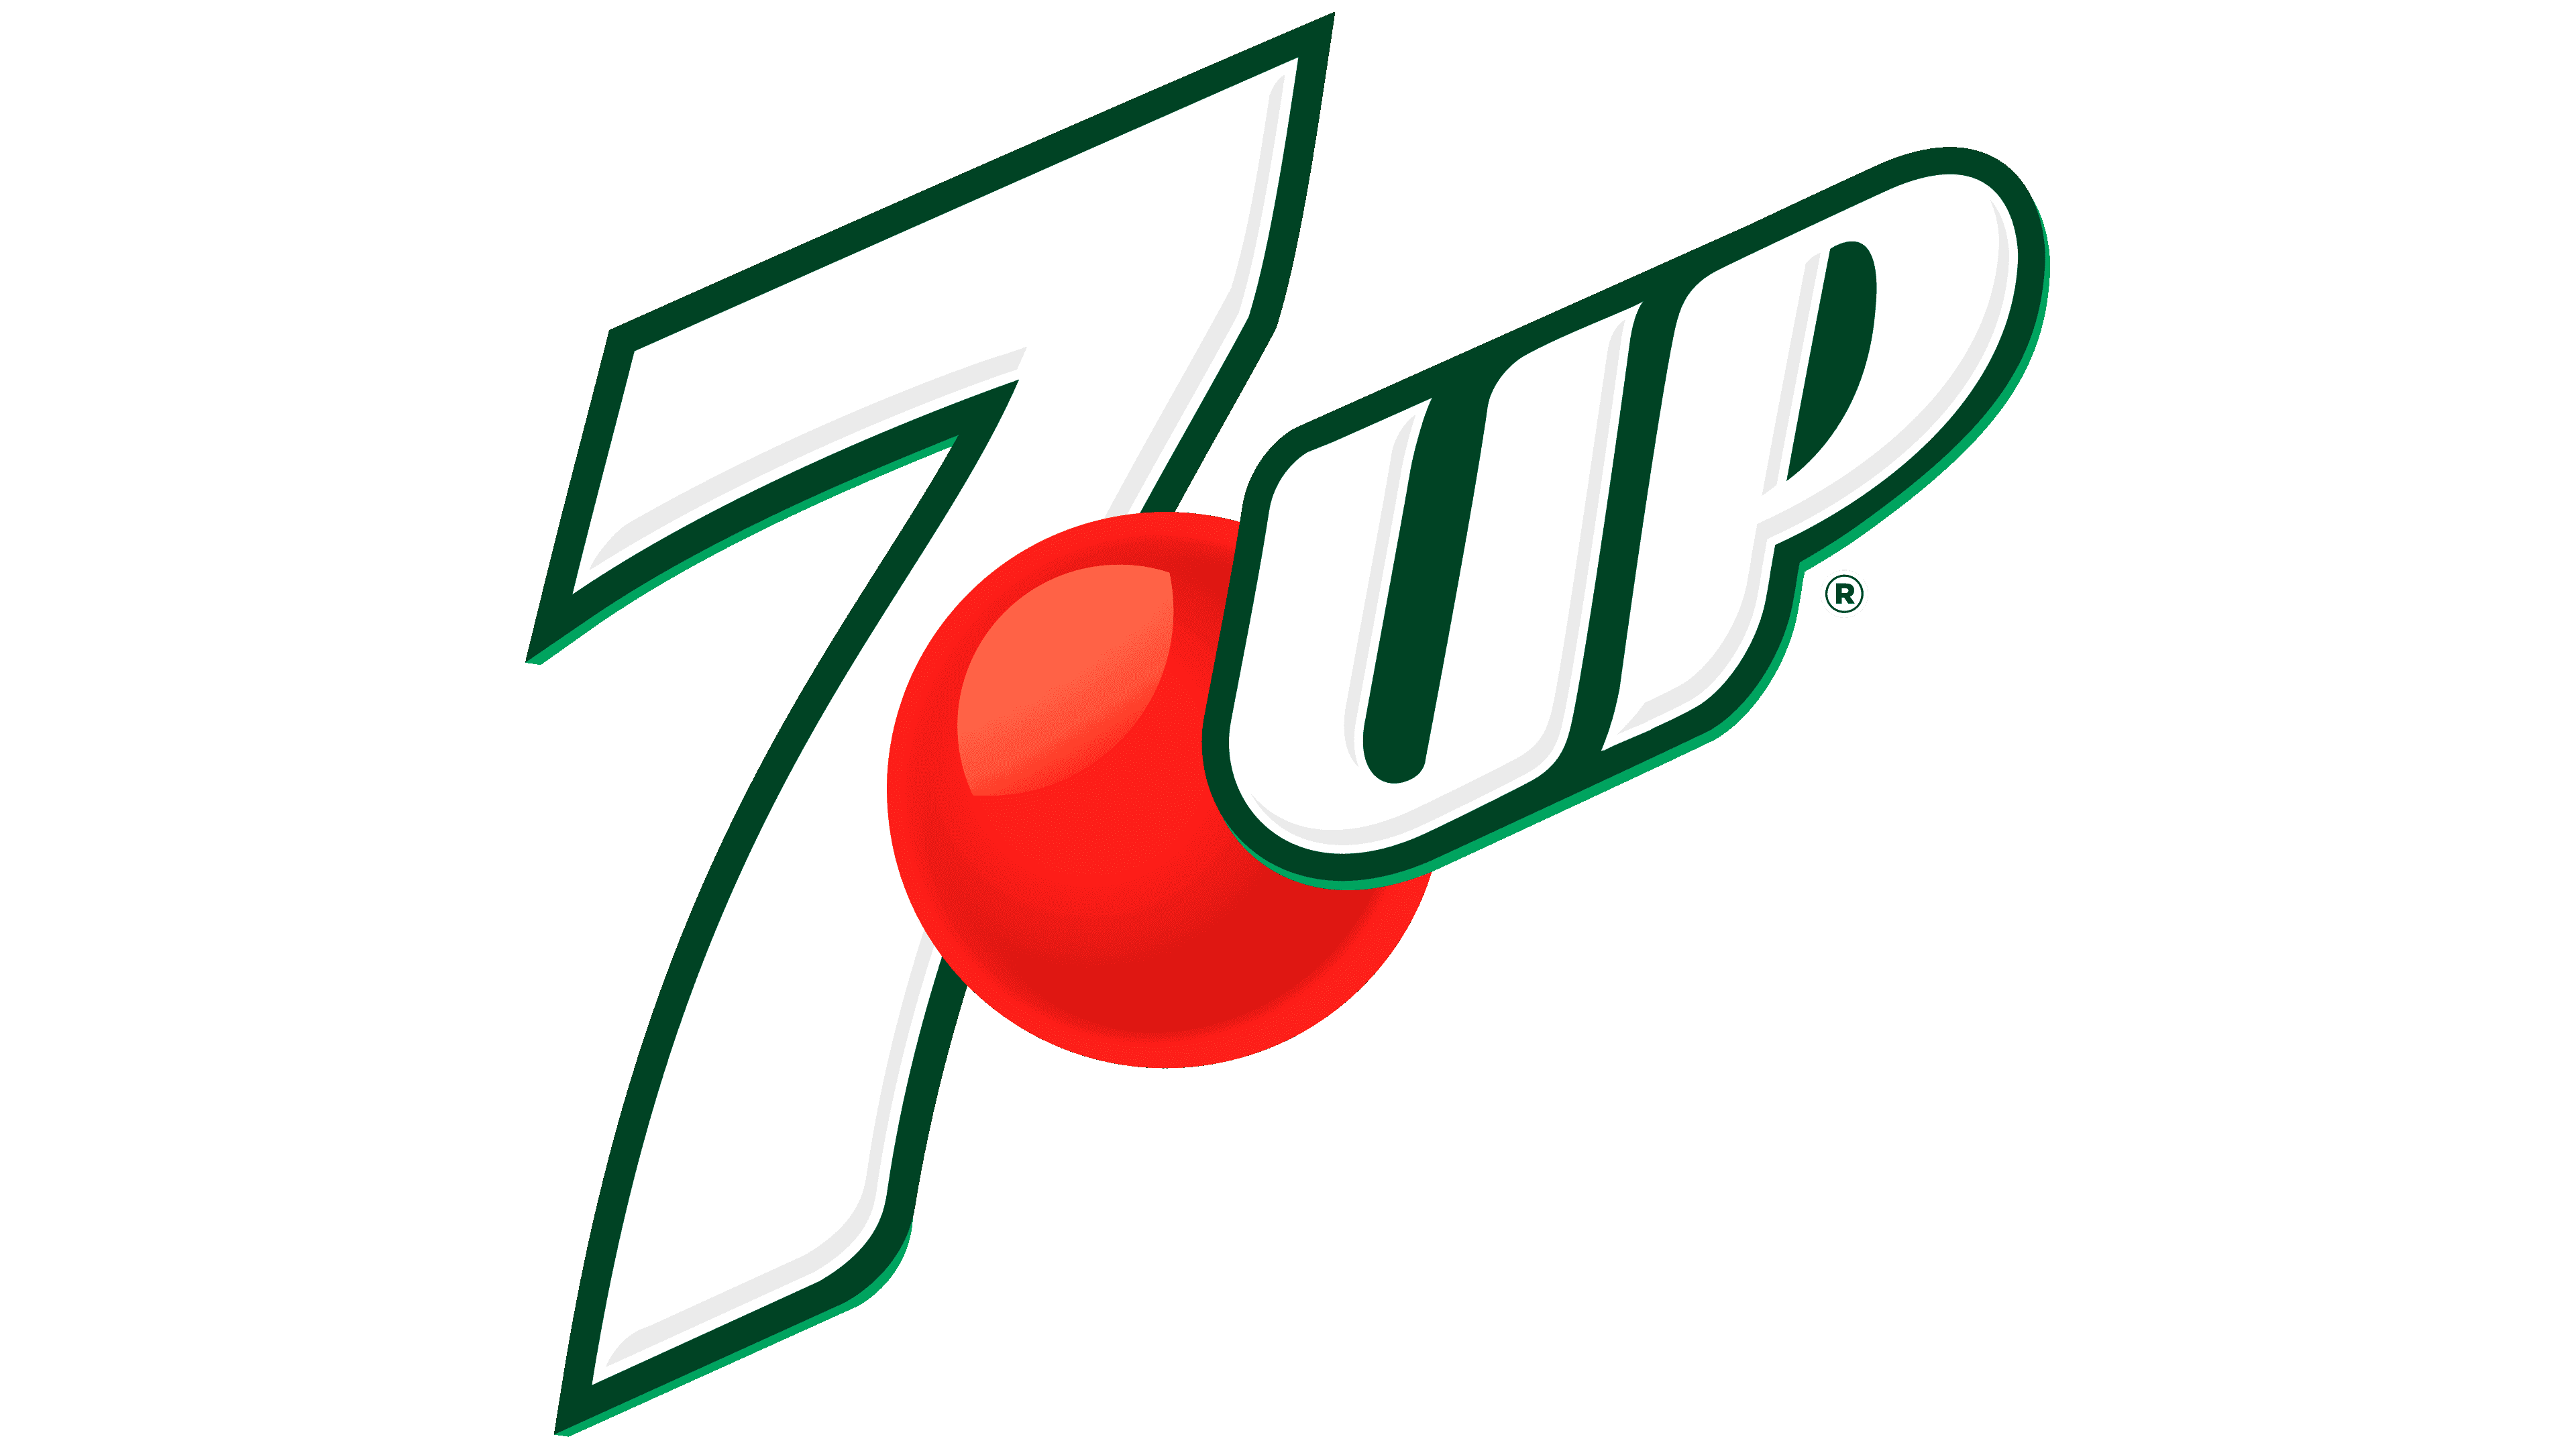 7up Logo, symbol, meaning, history, PNG